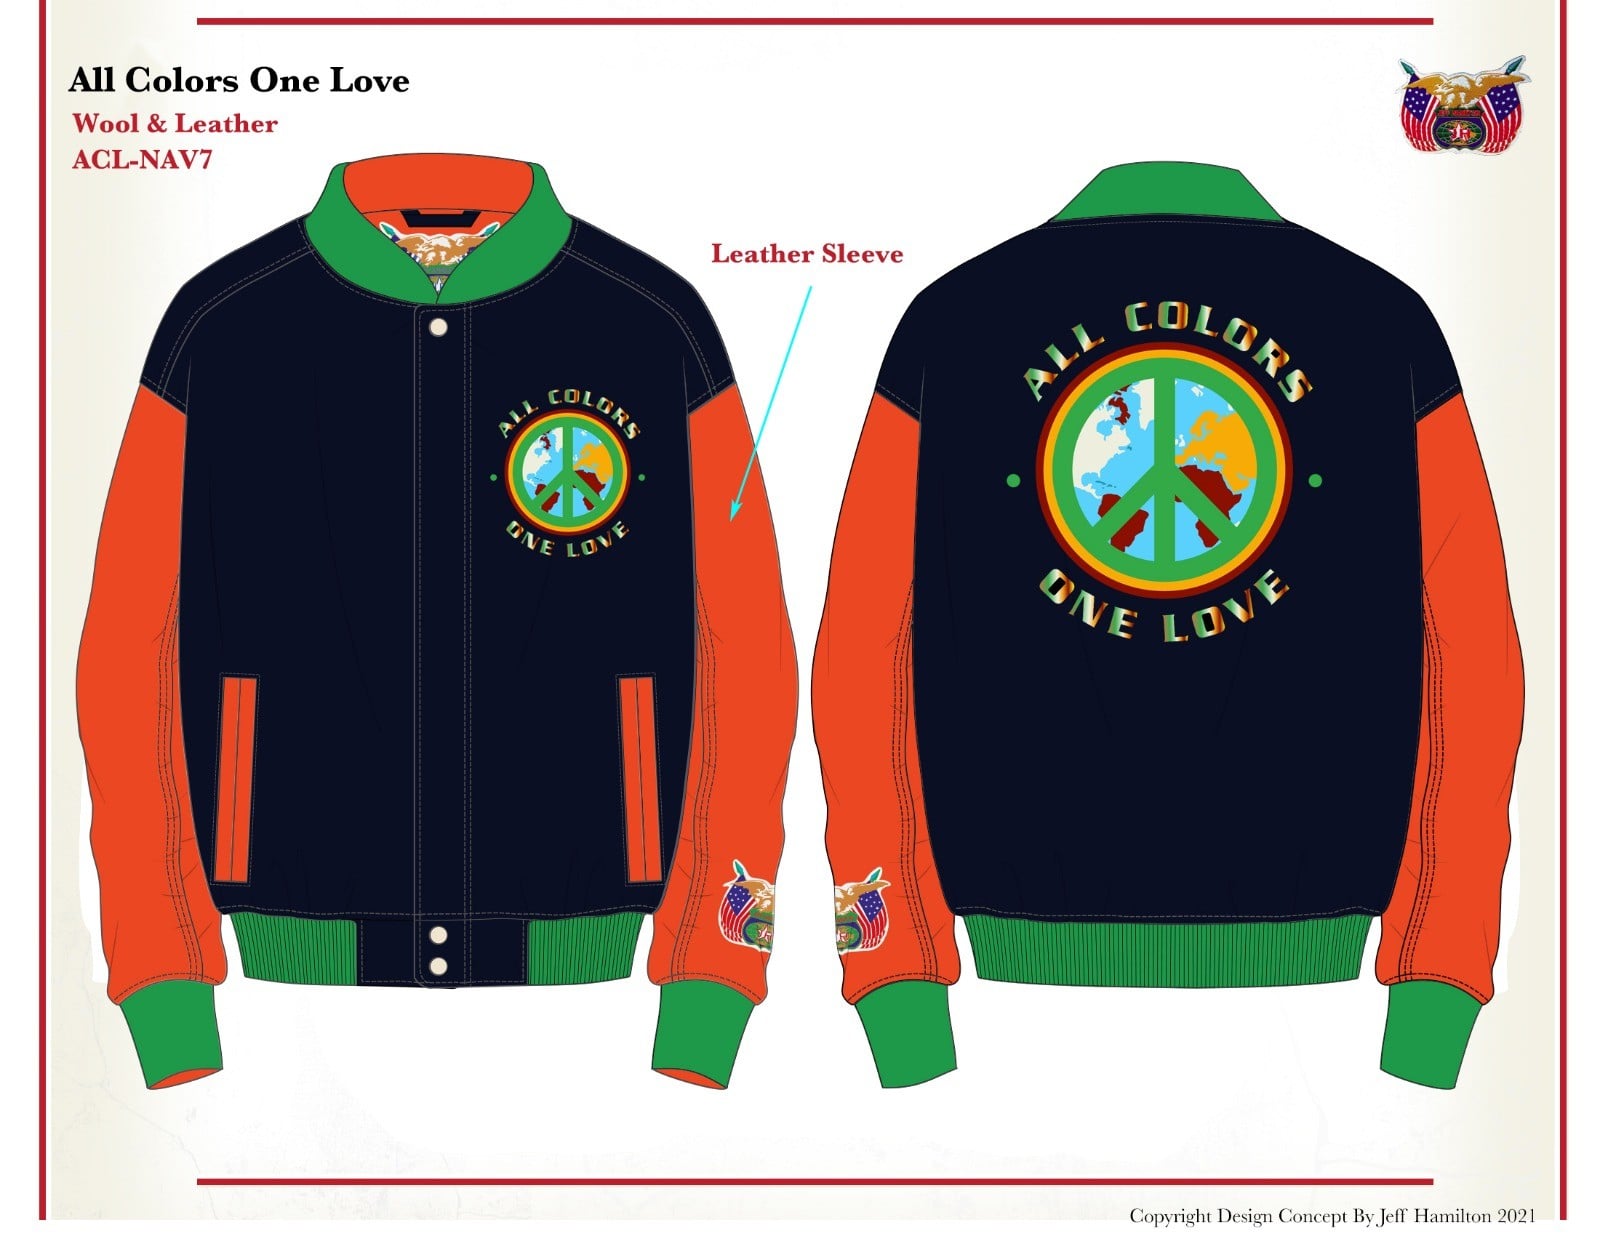 All Colors One Love Jacket